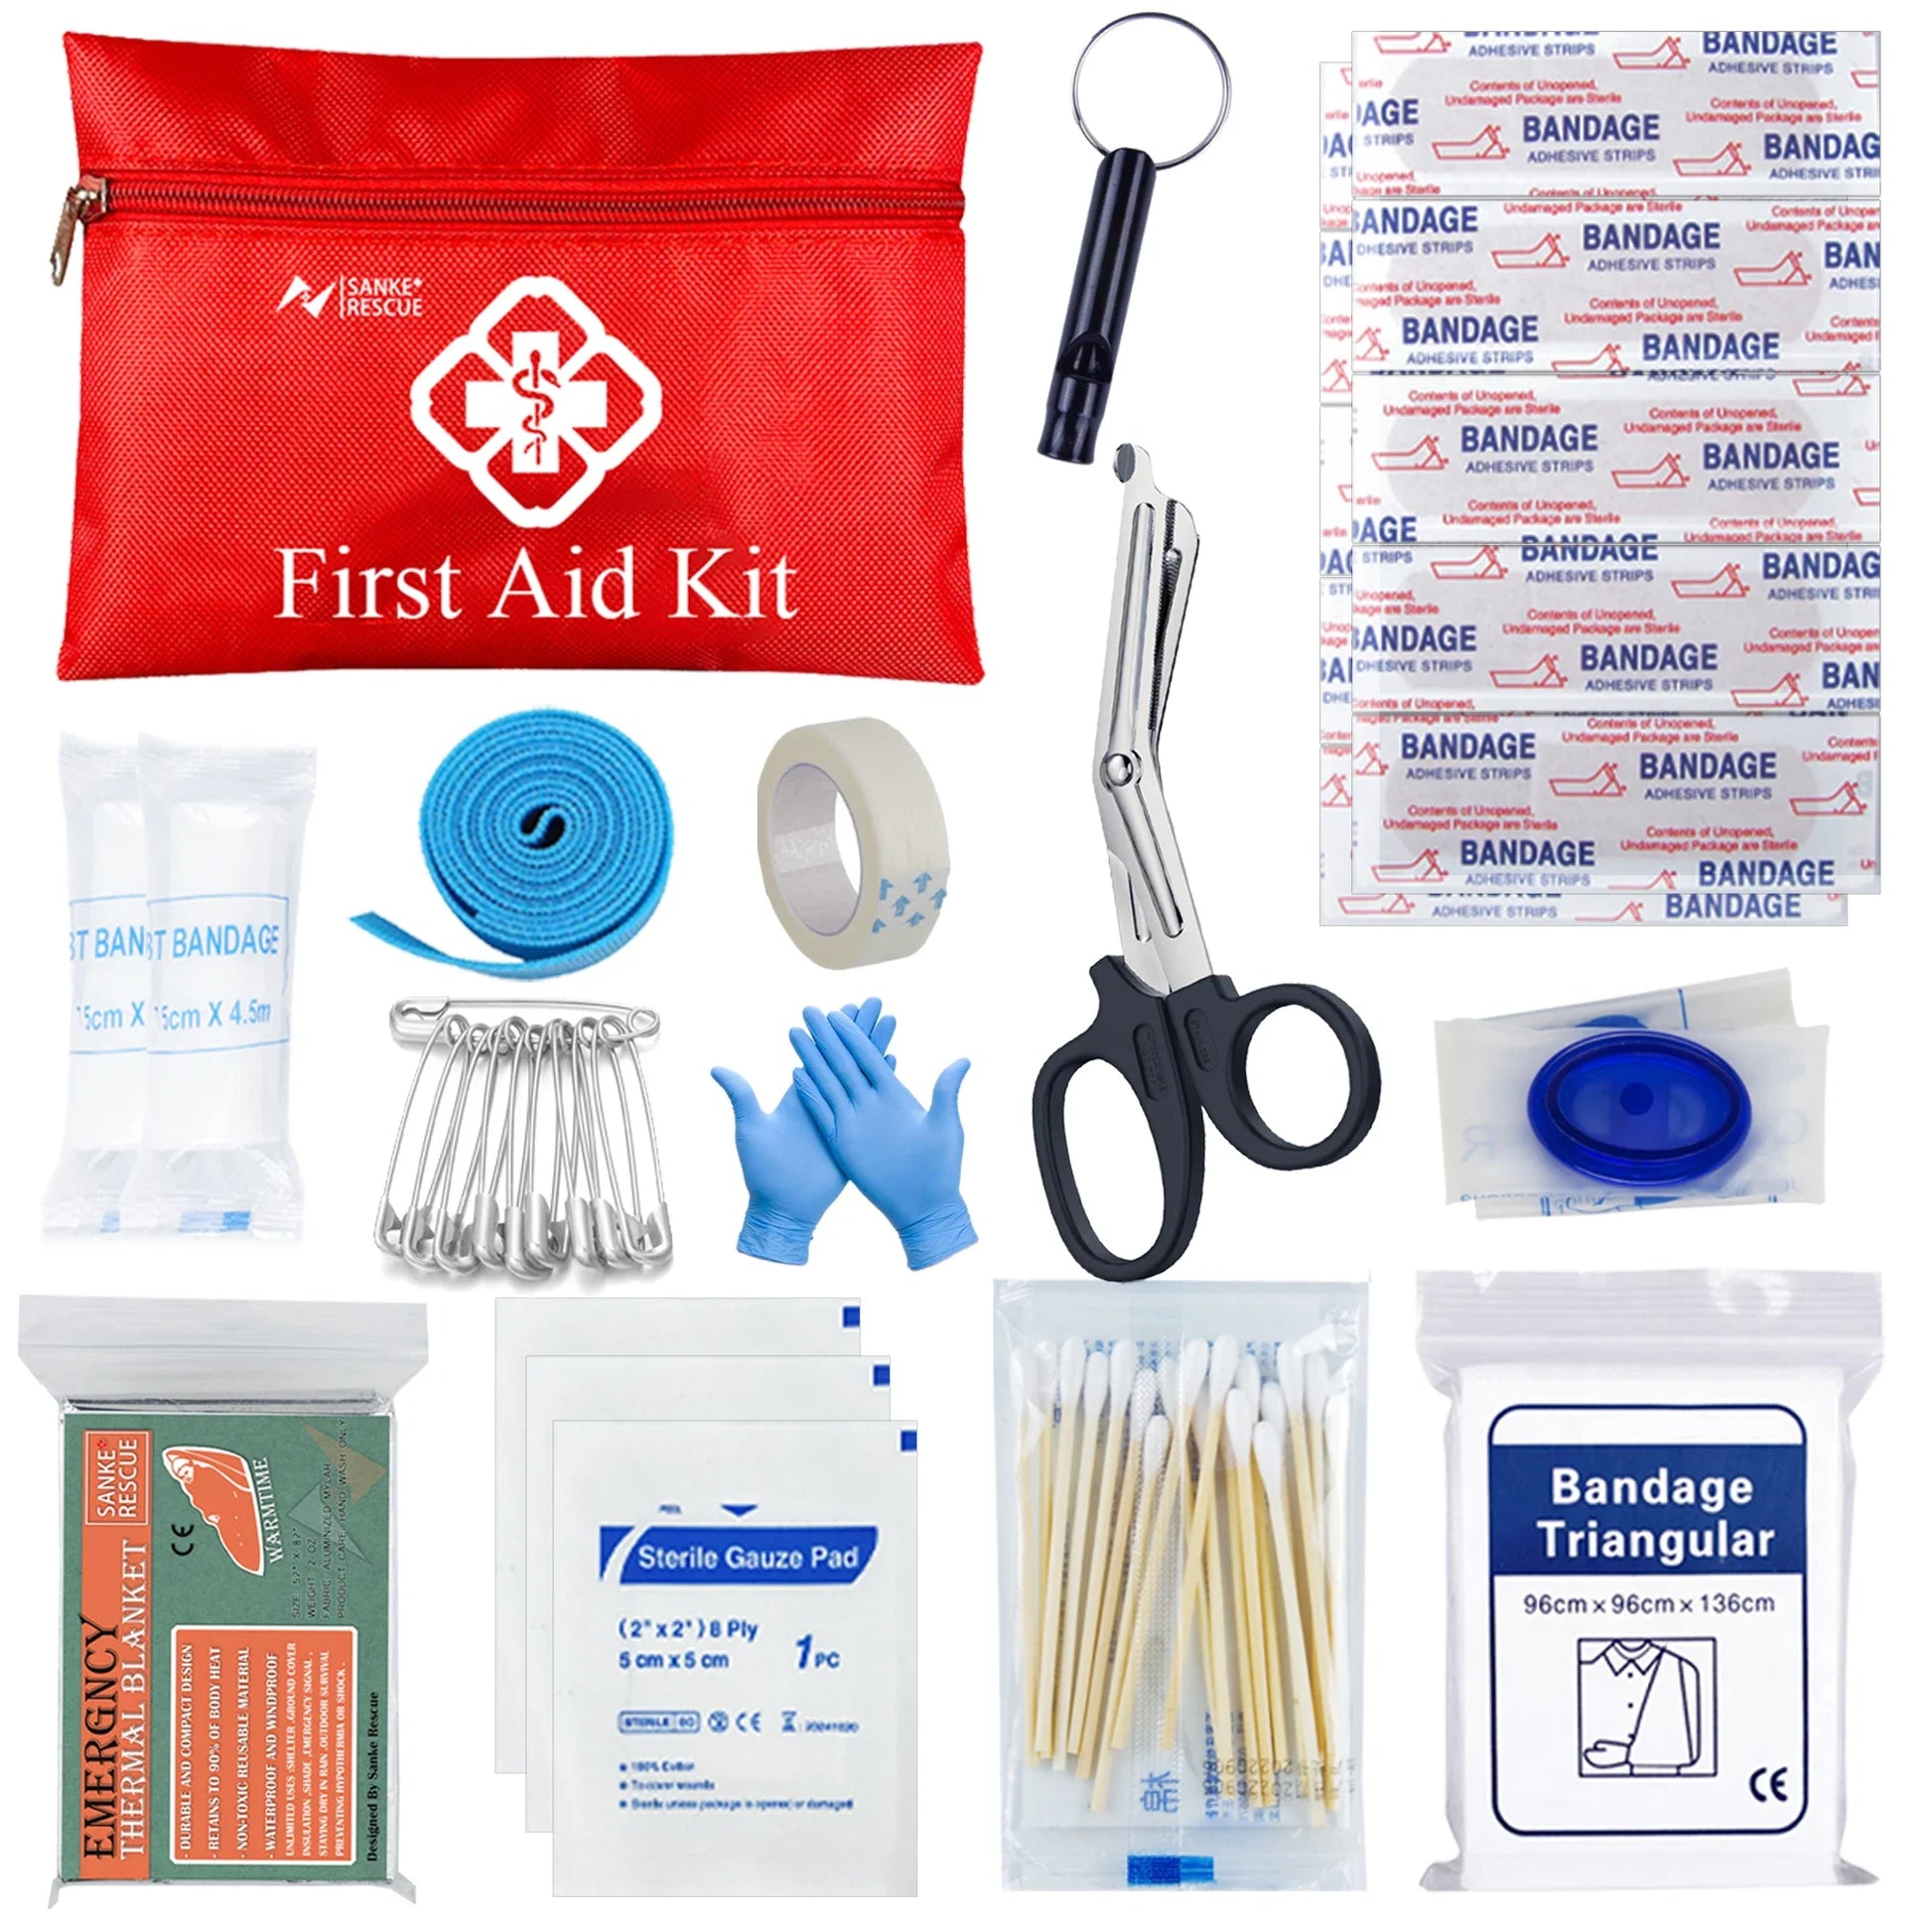 Emergency Tactical/First Aid Kit - 24 Essential Items for Emergency Preparedness - Tactical first aid kit Readi Gear